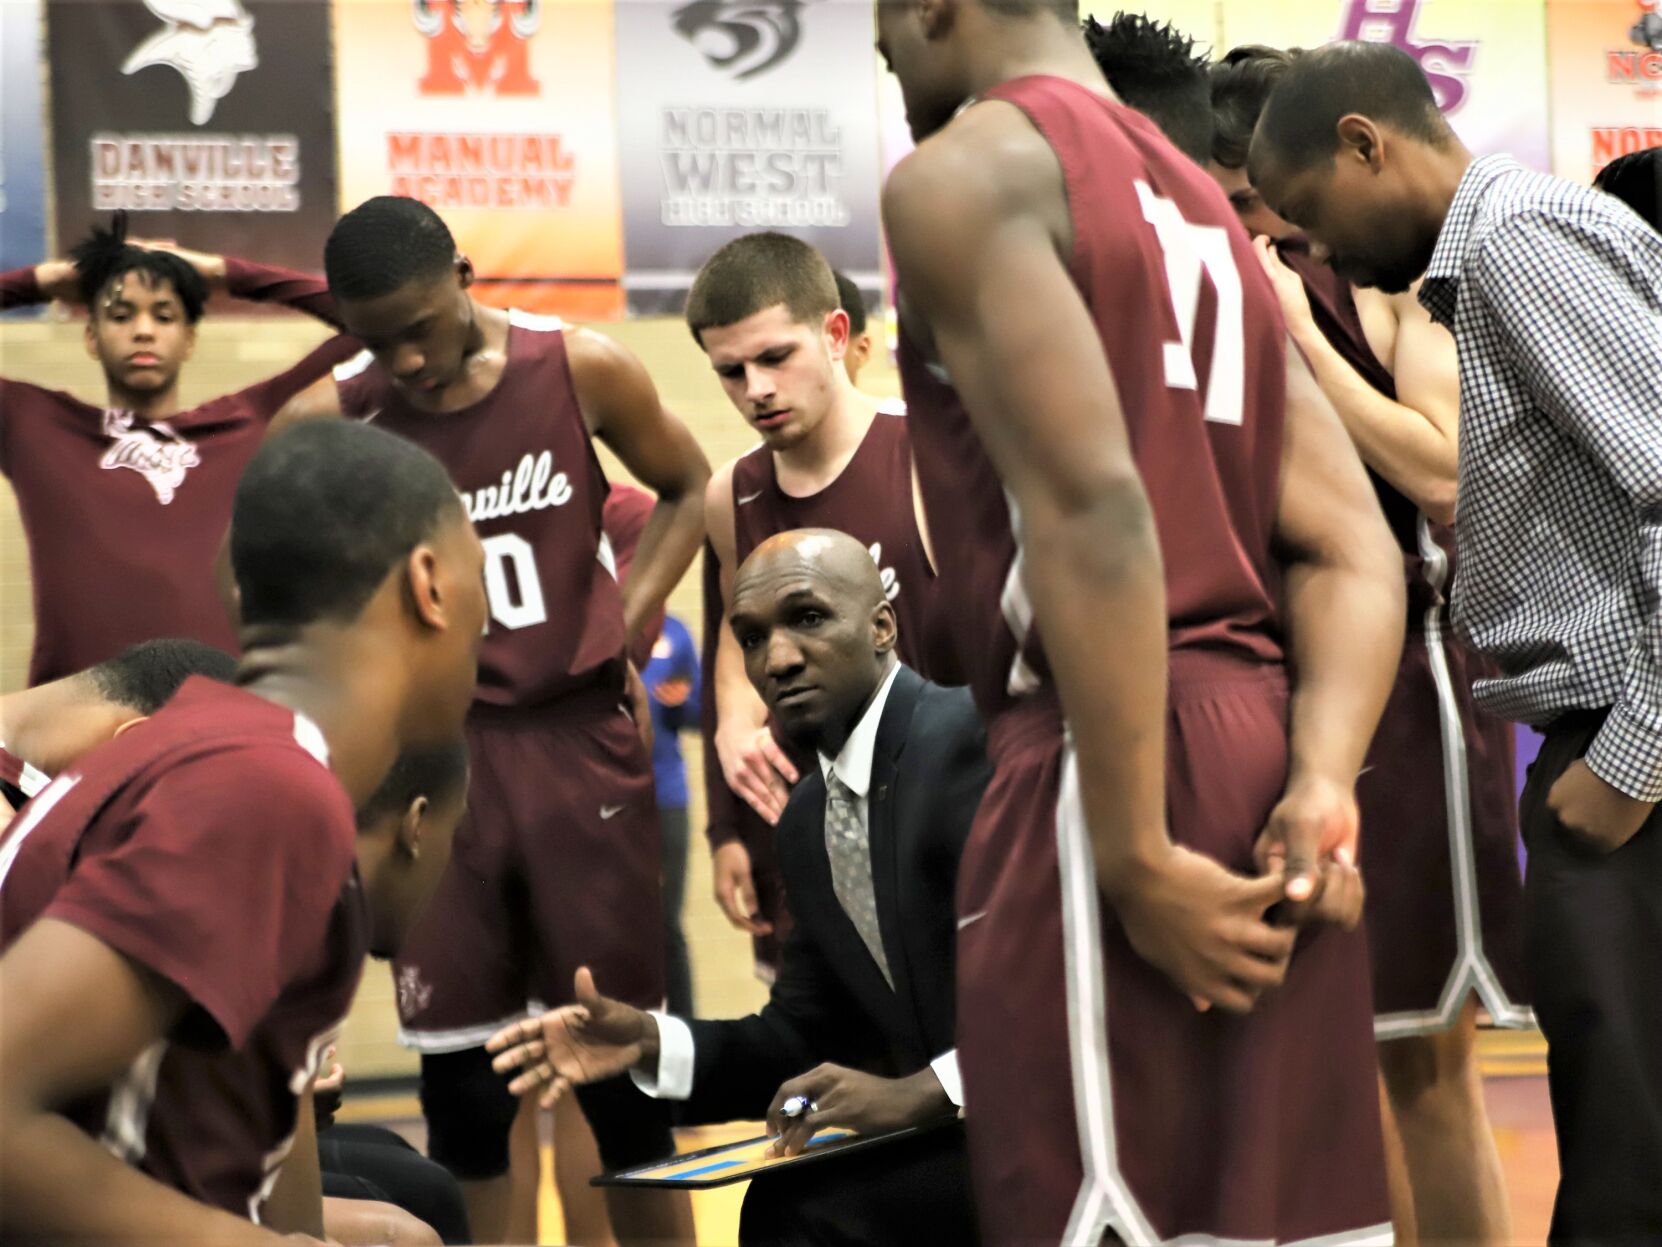 Durrell Robinson Steps Down as Danville Head Coach After 5 Years, Focusing on Mentorship and Tough Competition